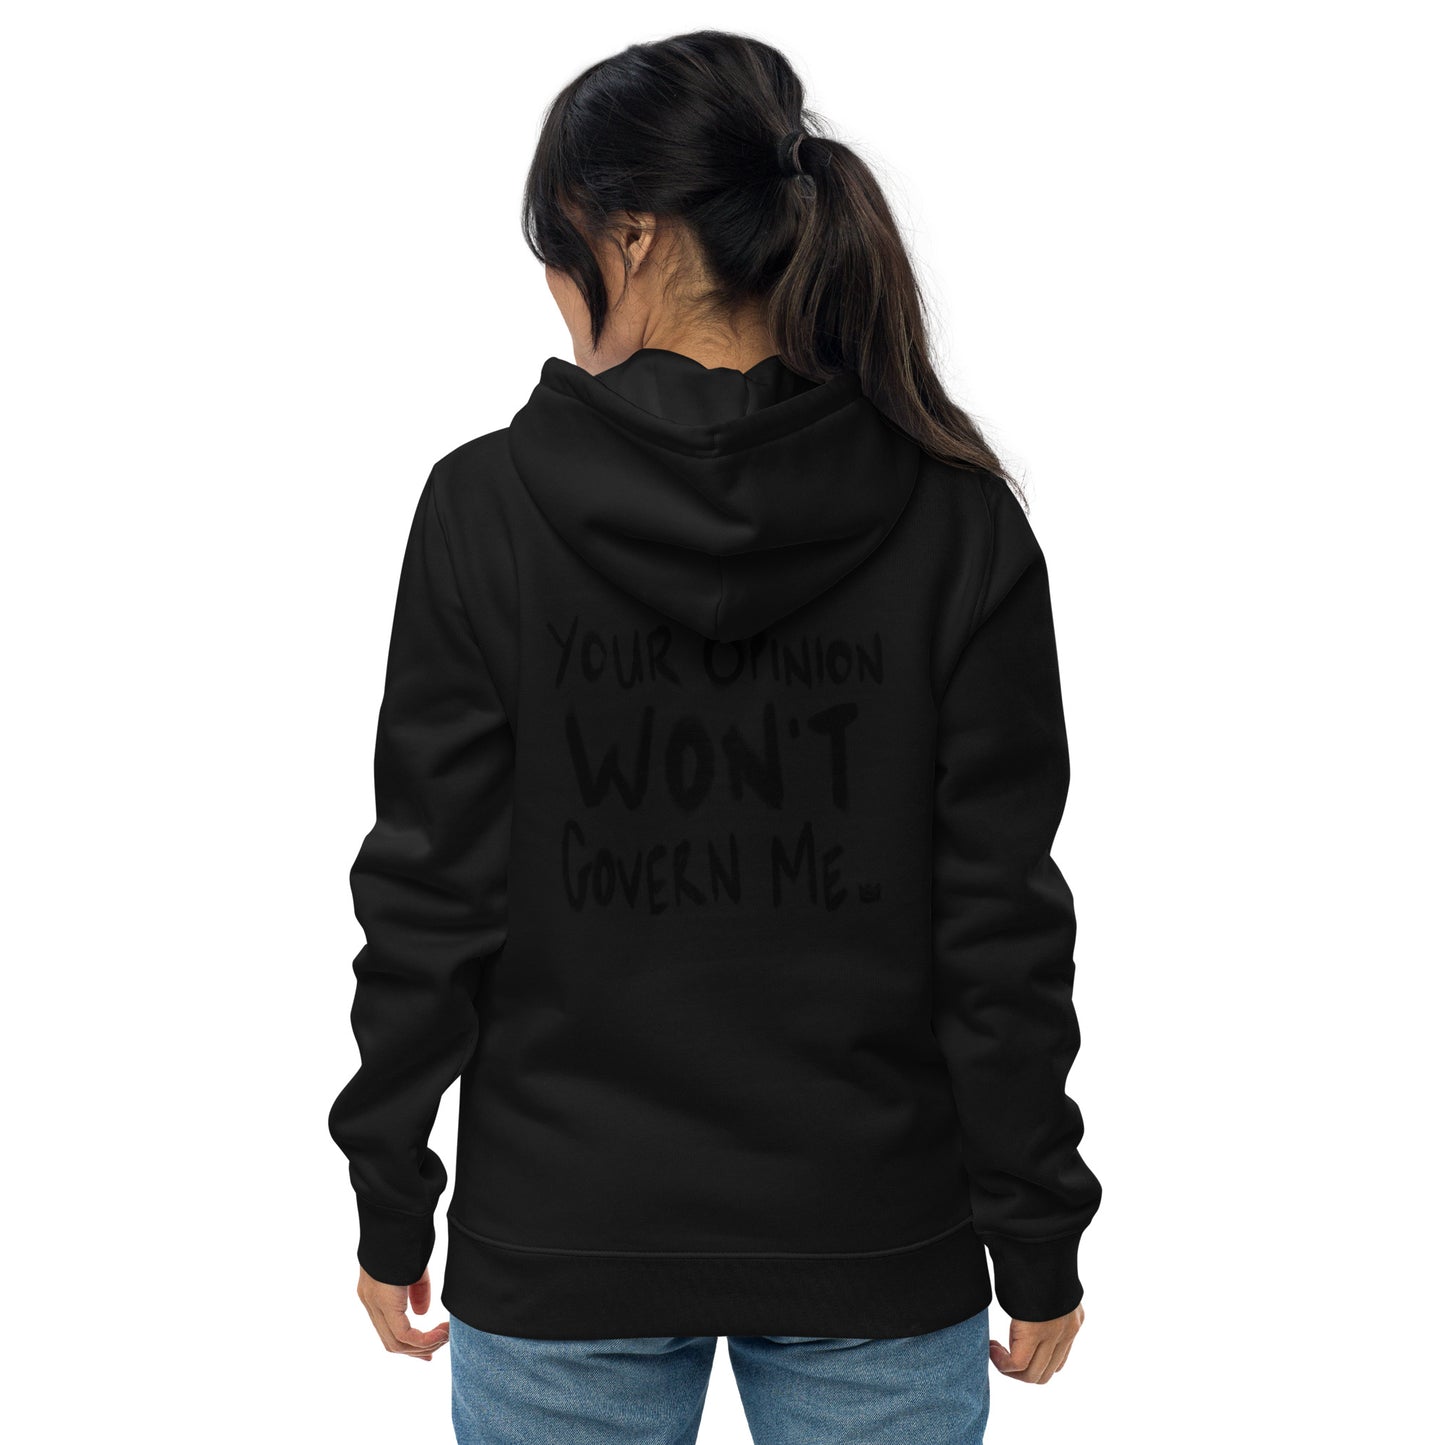 Your Opinion Won't Govern Me Hoodie